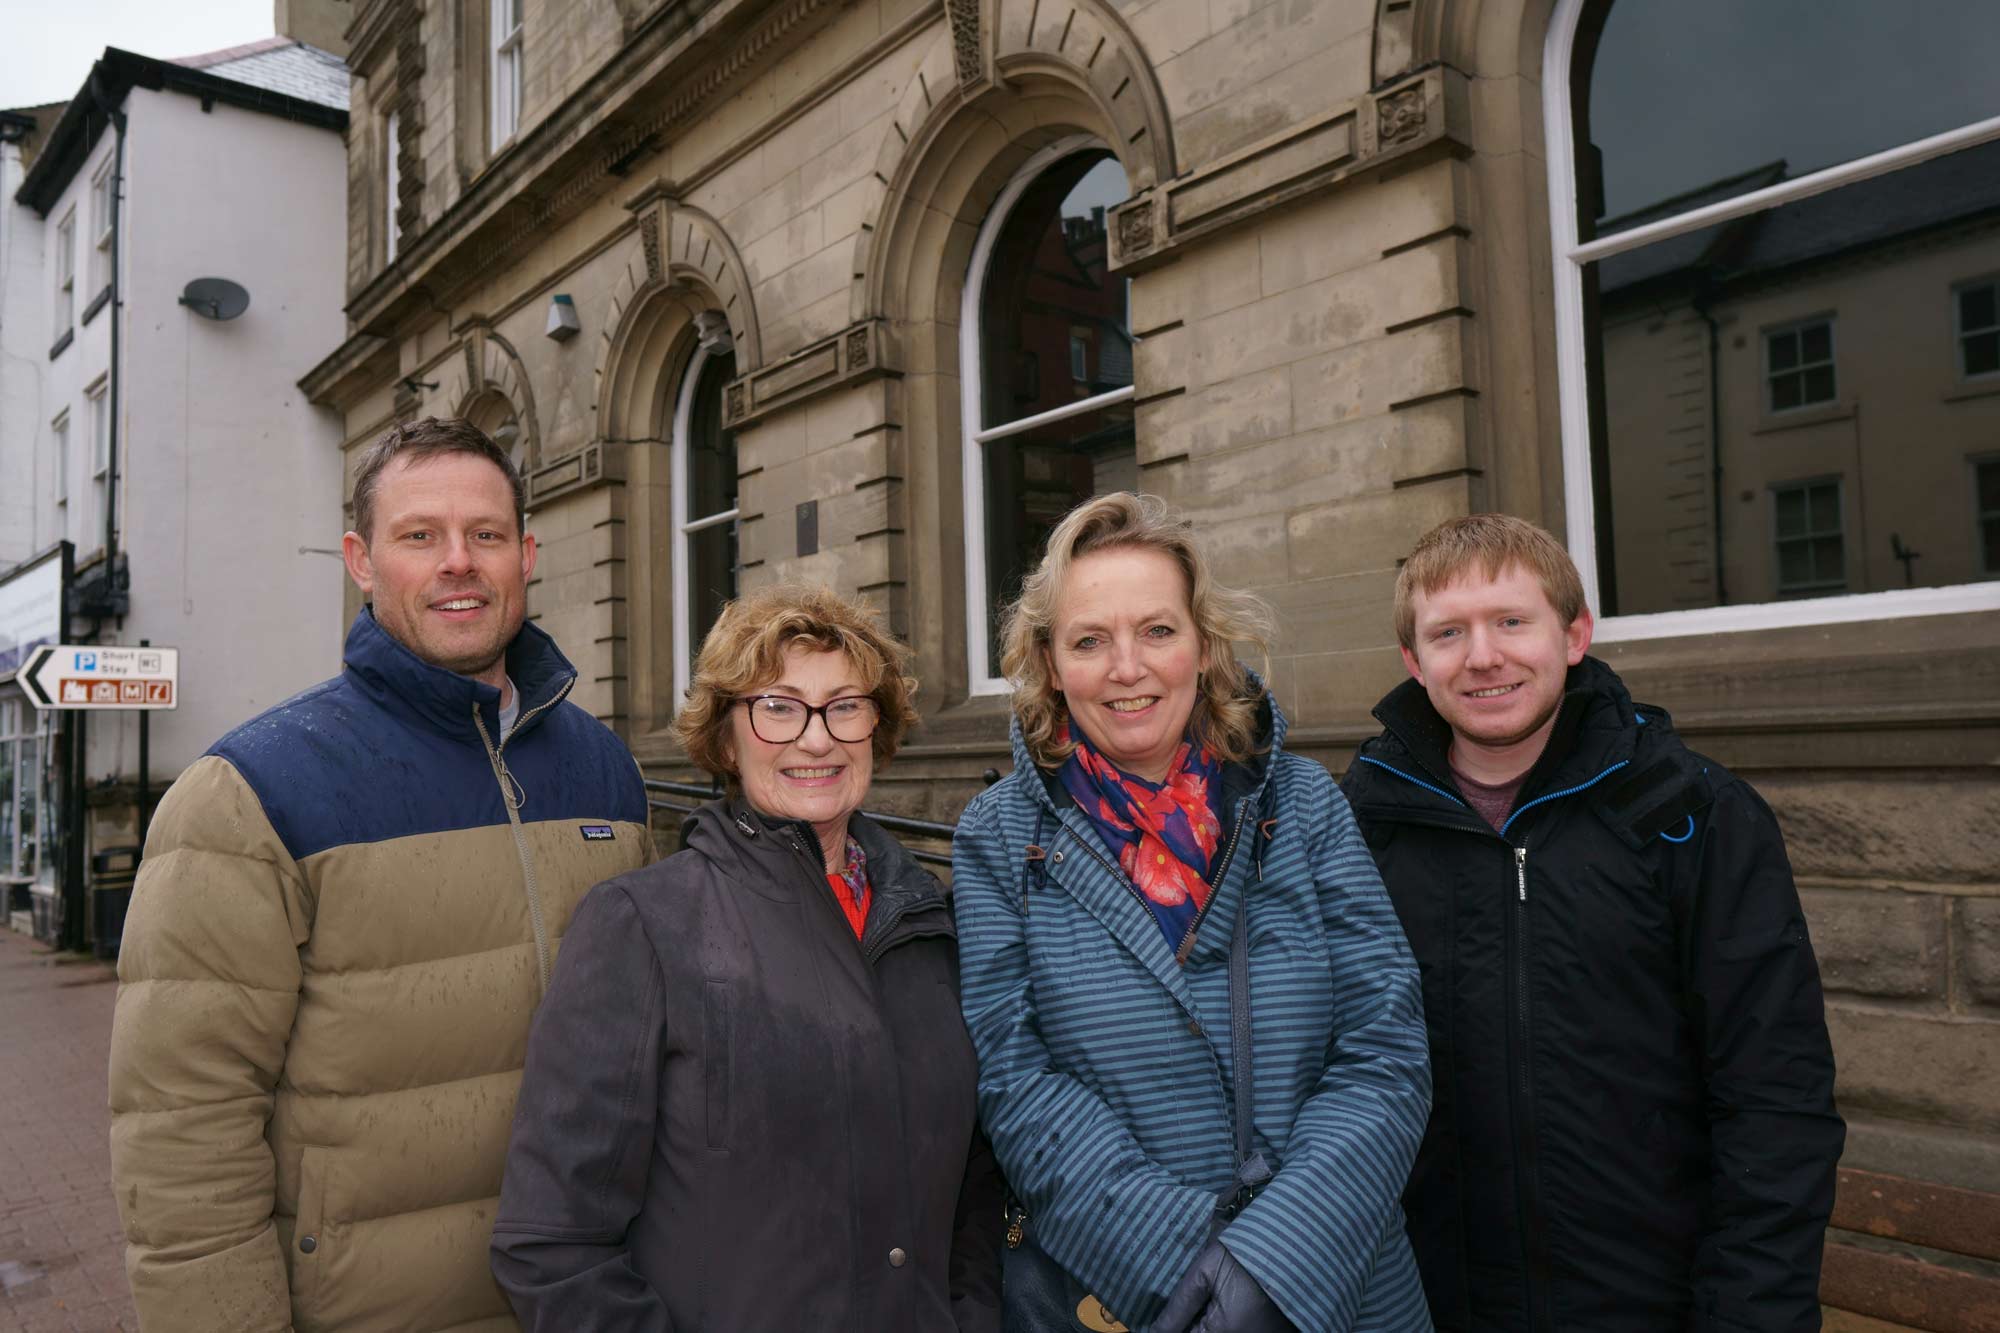 Tim Sutherland, Liz Baxandall, Cathy Allday and Cllr Ed Darling - outside Claro Chambers in Knaresborough